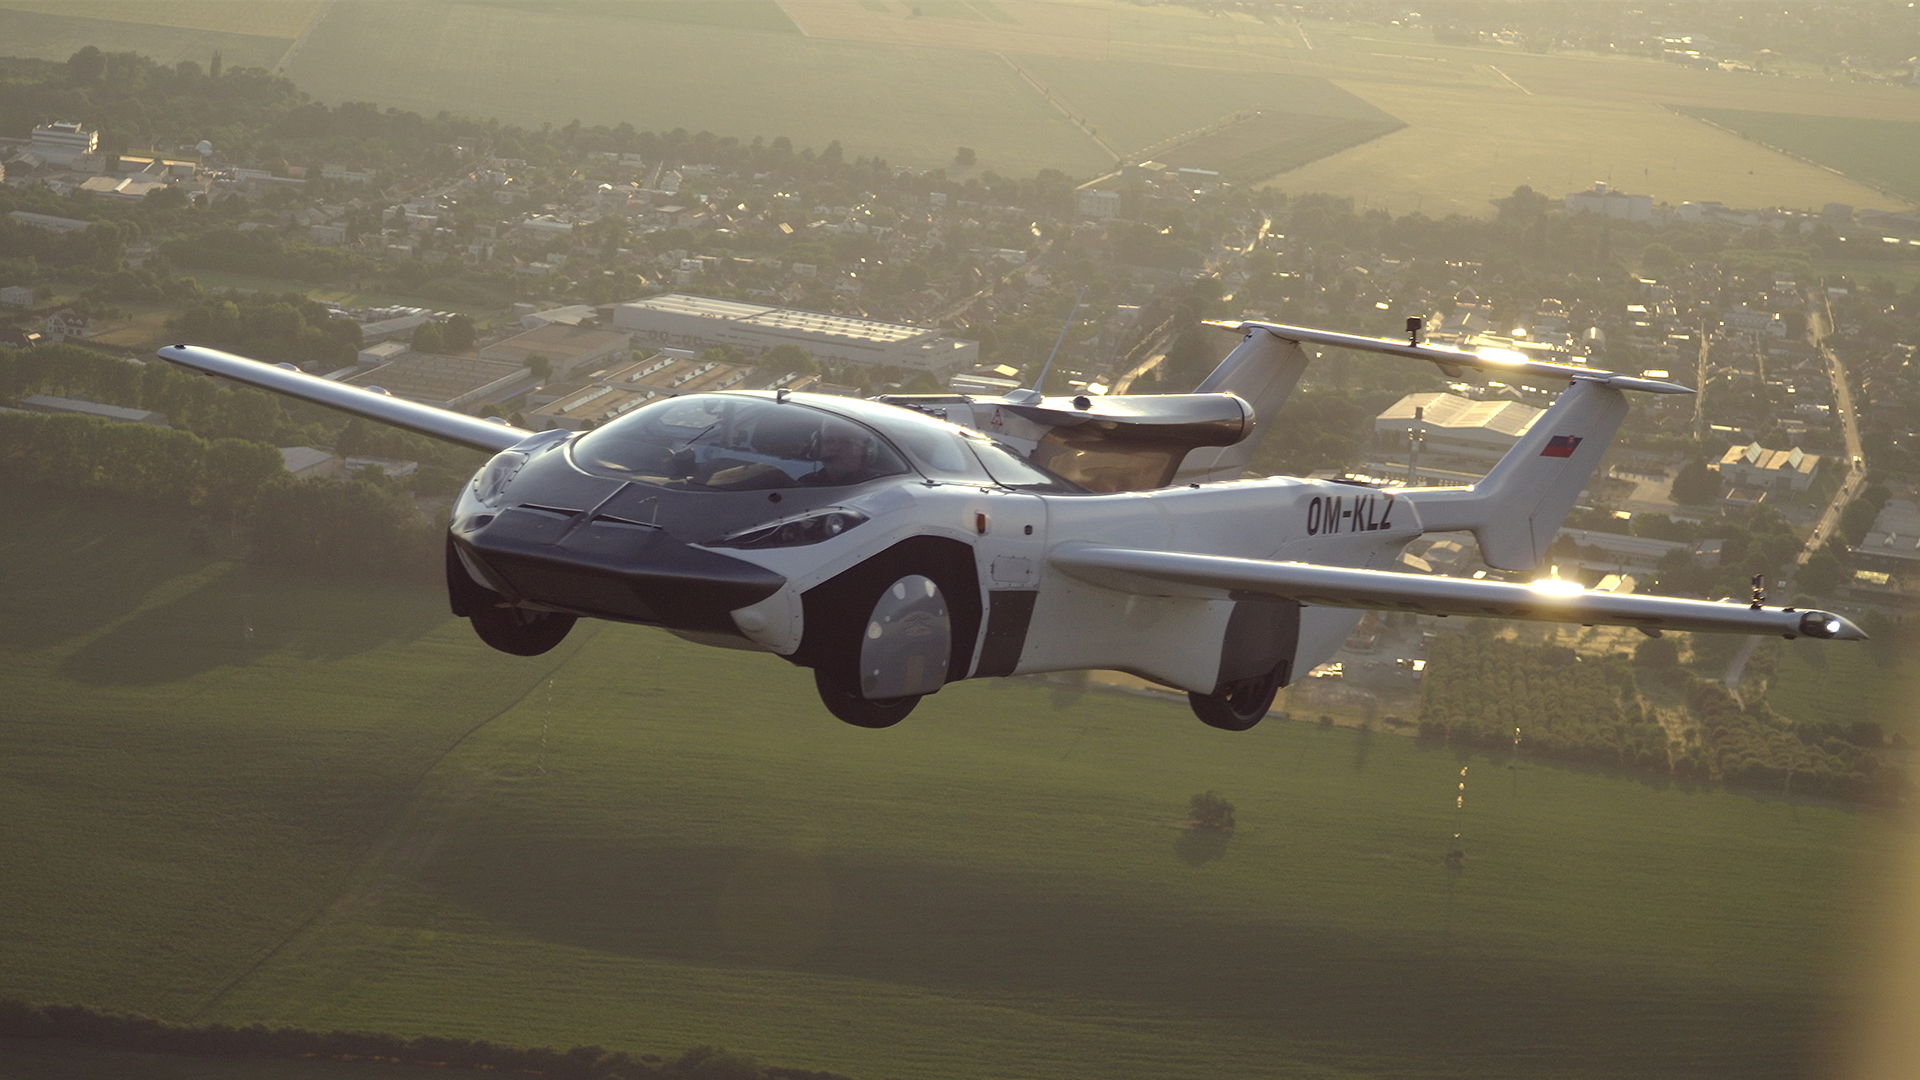 A Flying Car Prototype Sporting A BMW Engine Has Completed Its First Test Flight Between Cities